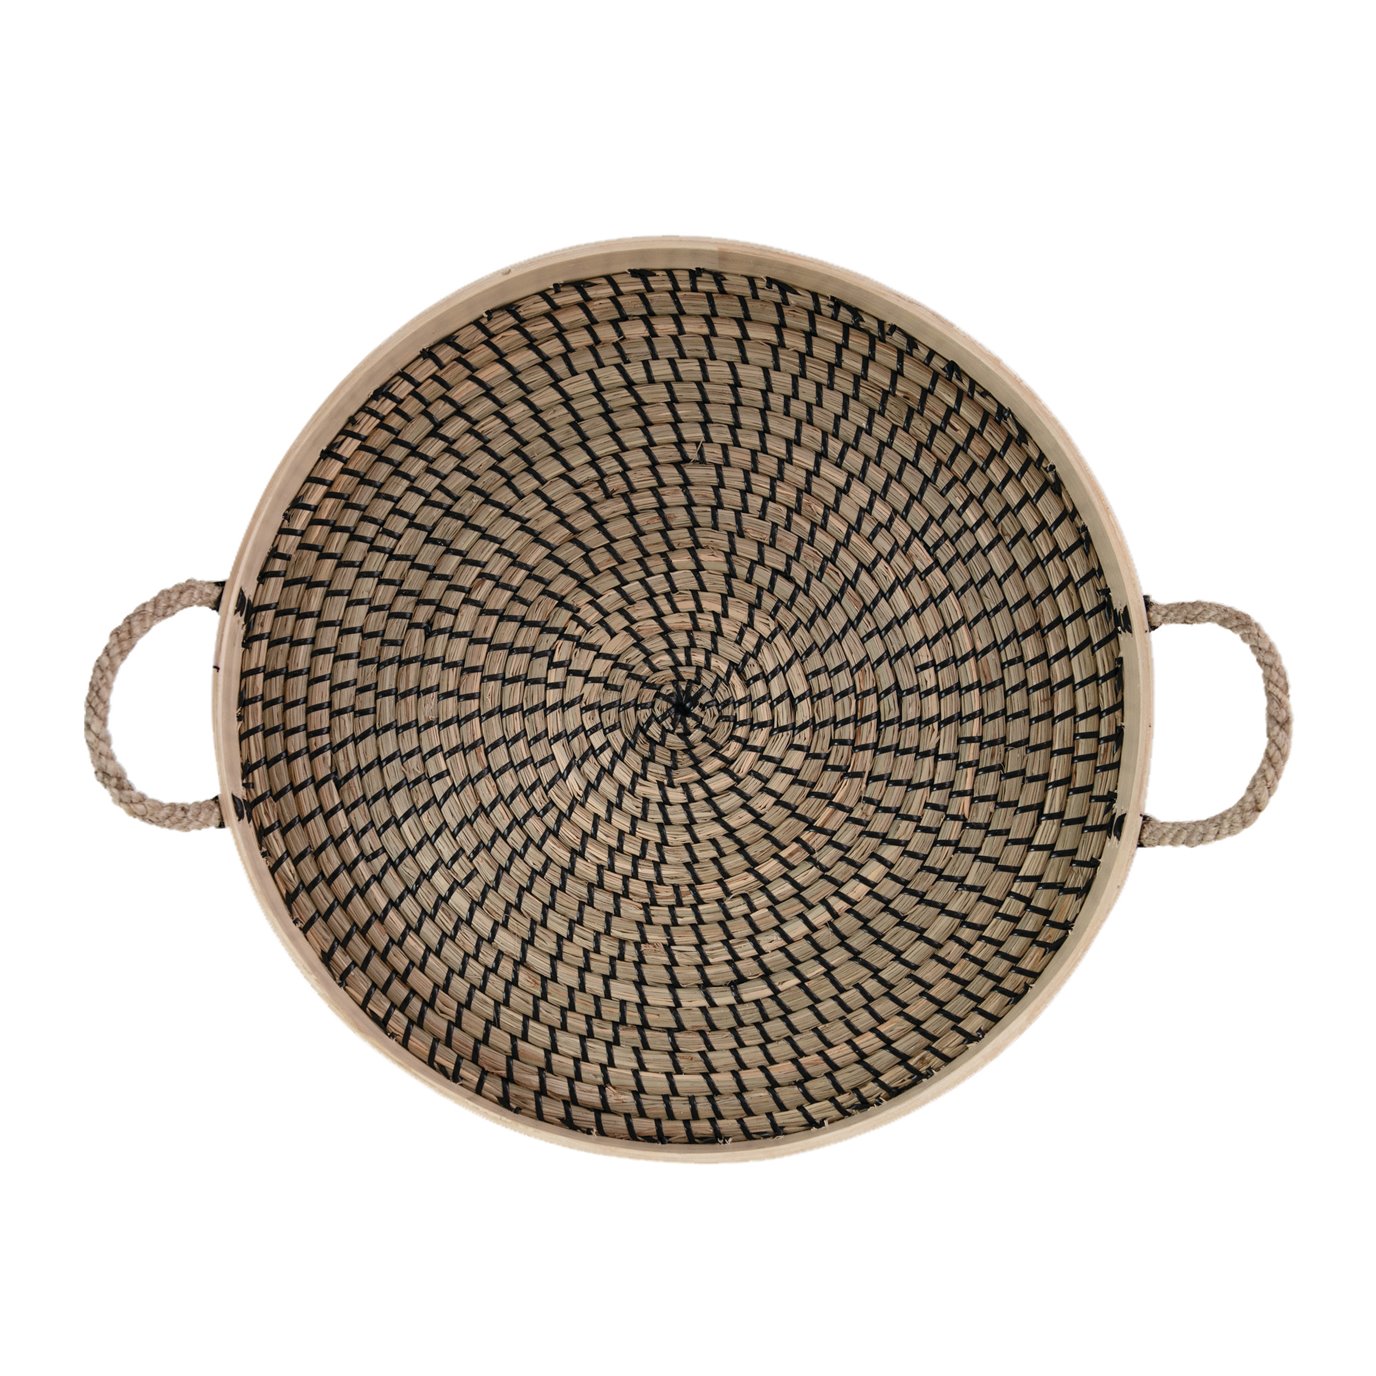 Decorative Seagrass and Bamboo Natural and Black Tray with Rope Handles